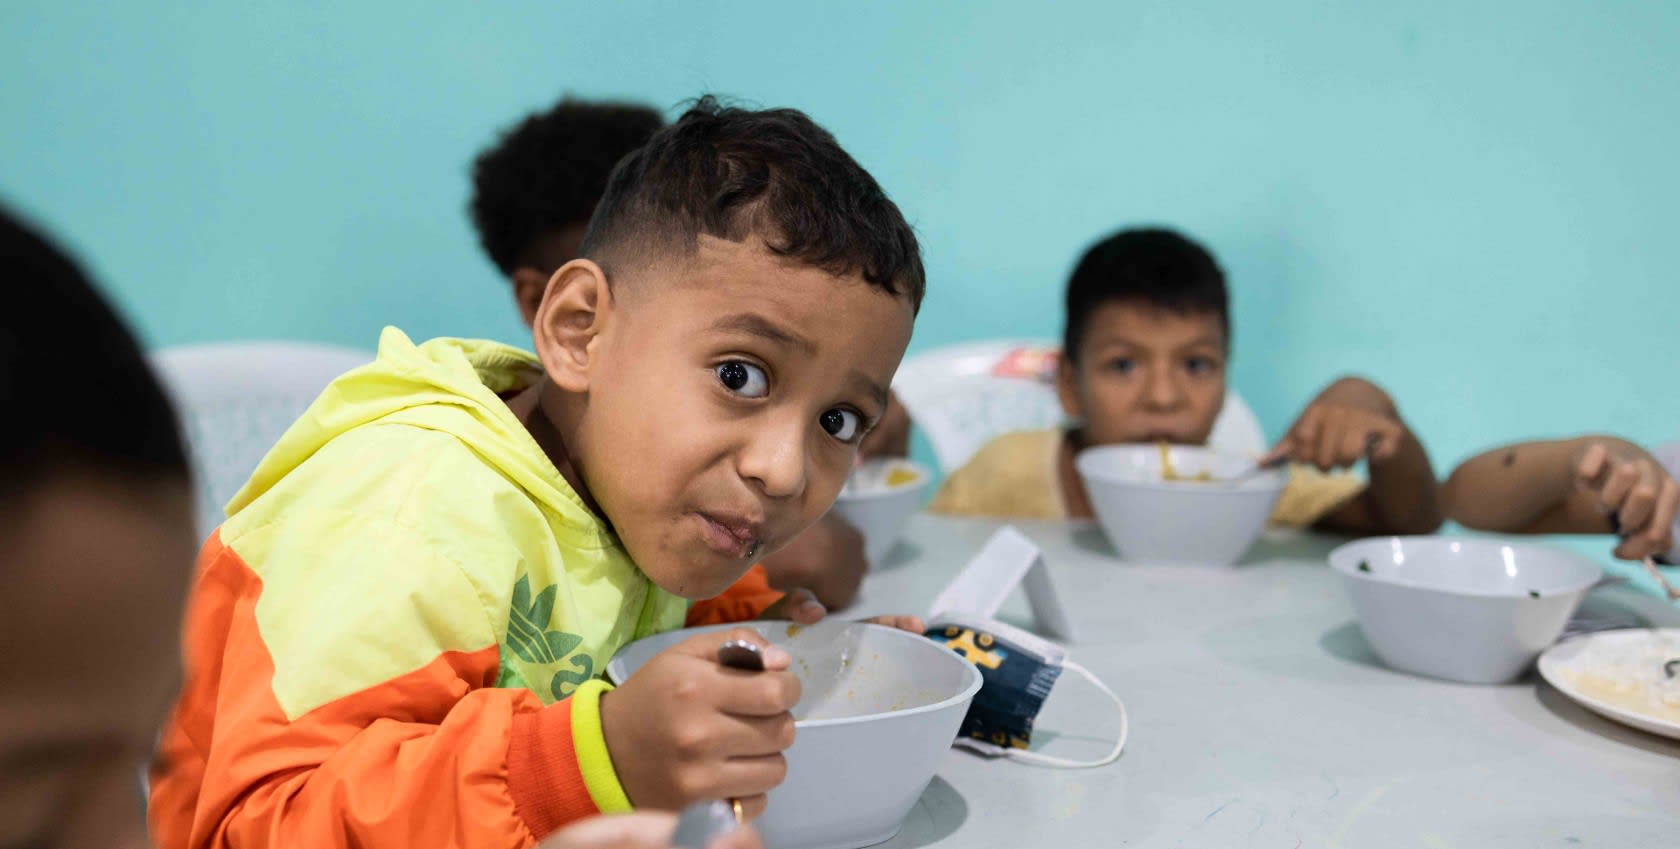 A child dining with a bowl in his hand.